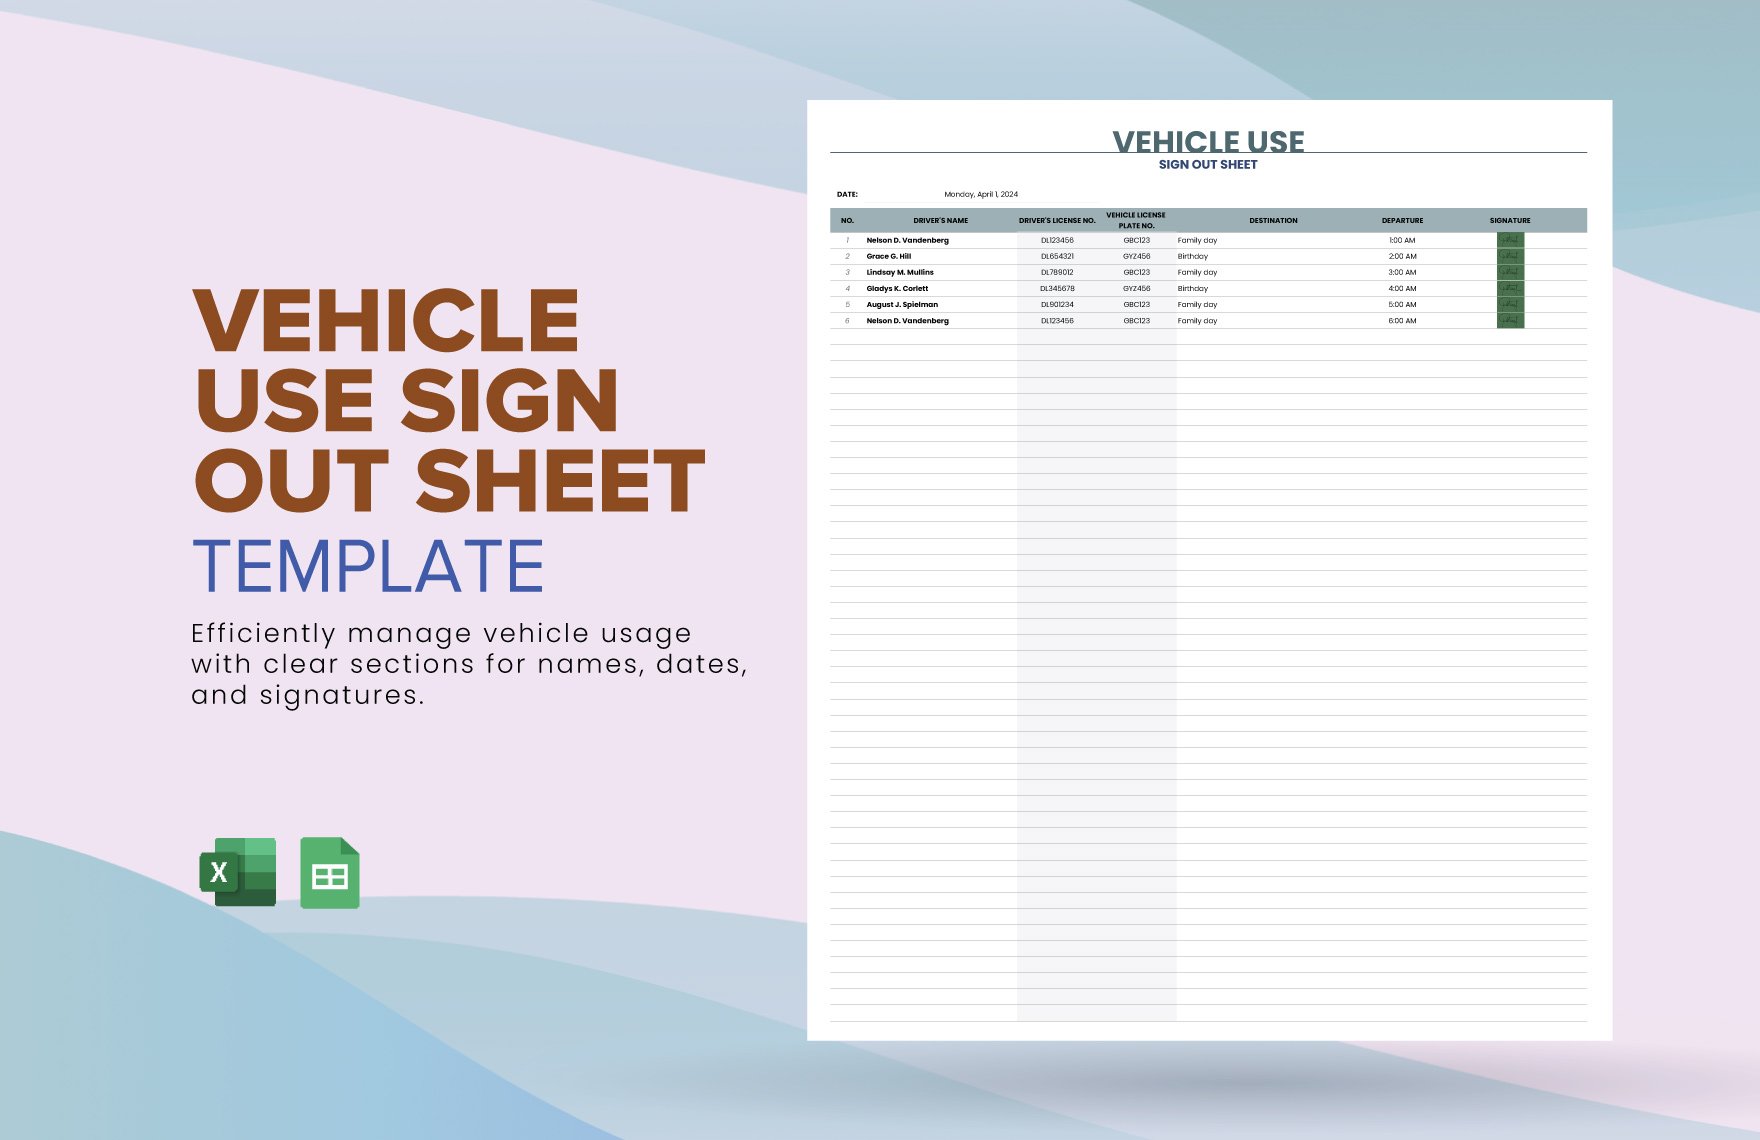 Vehicle Use Sign Out Sheet Template